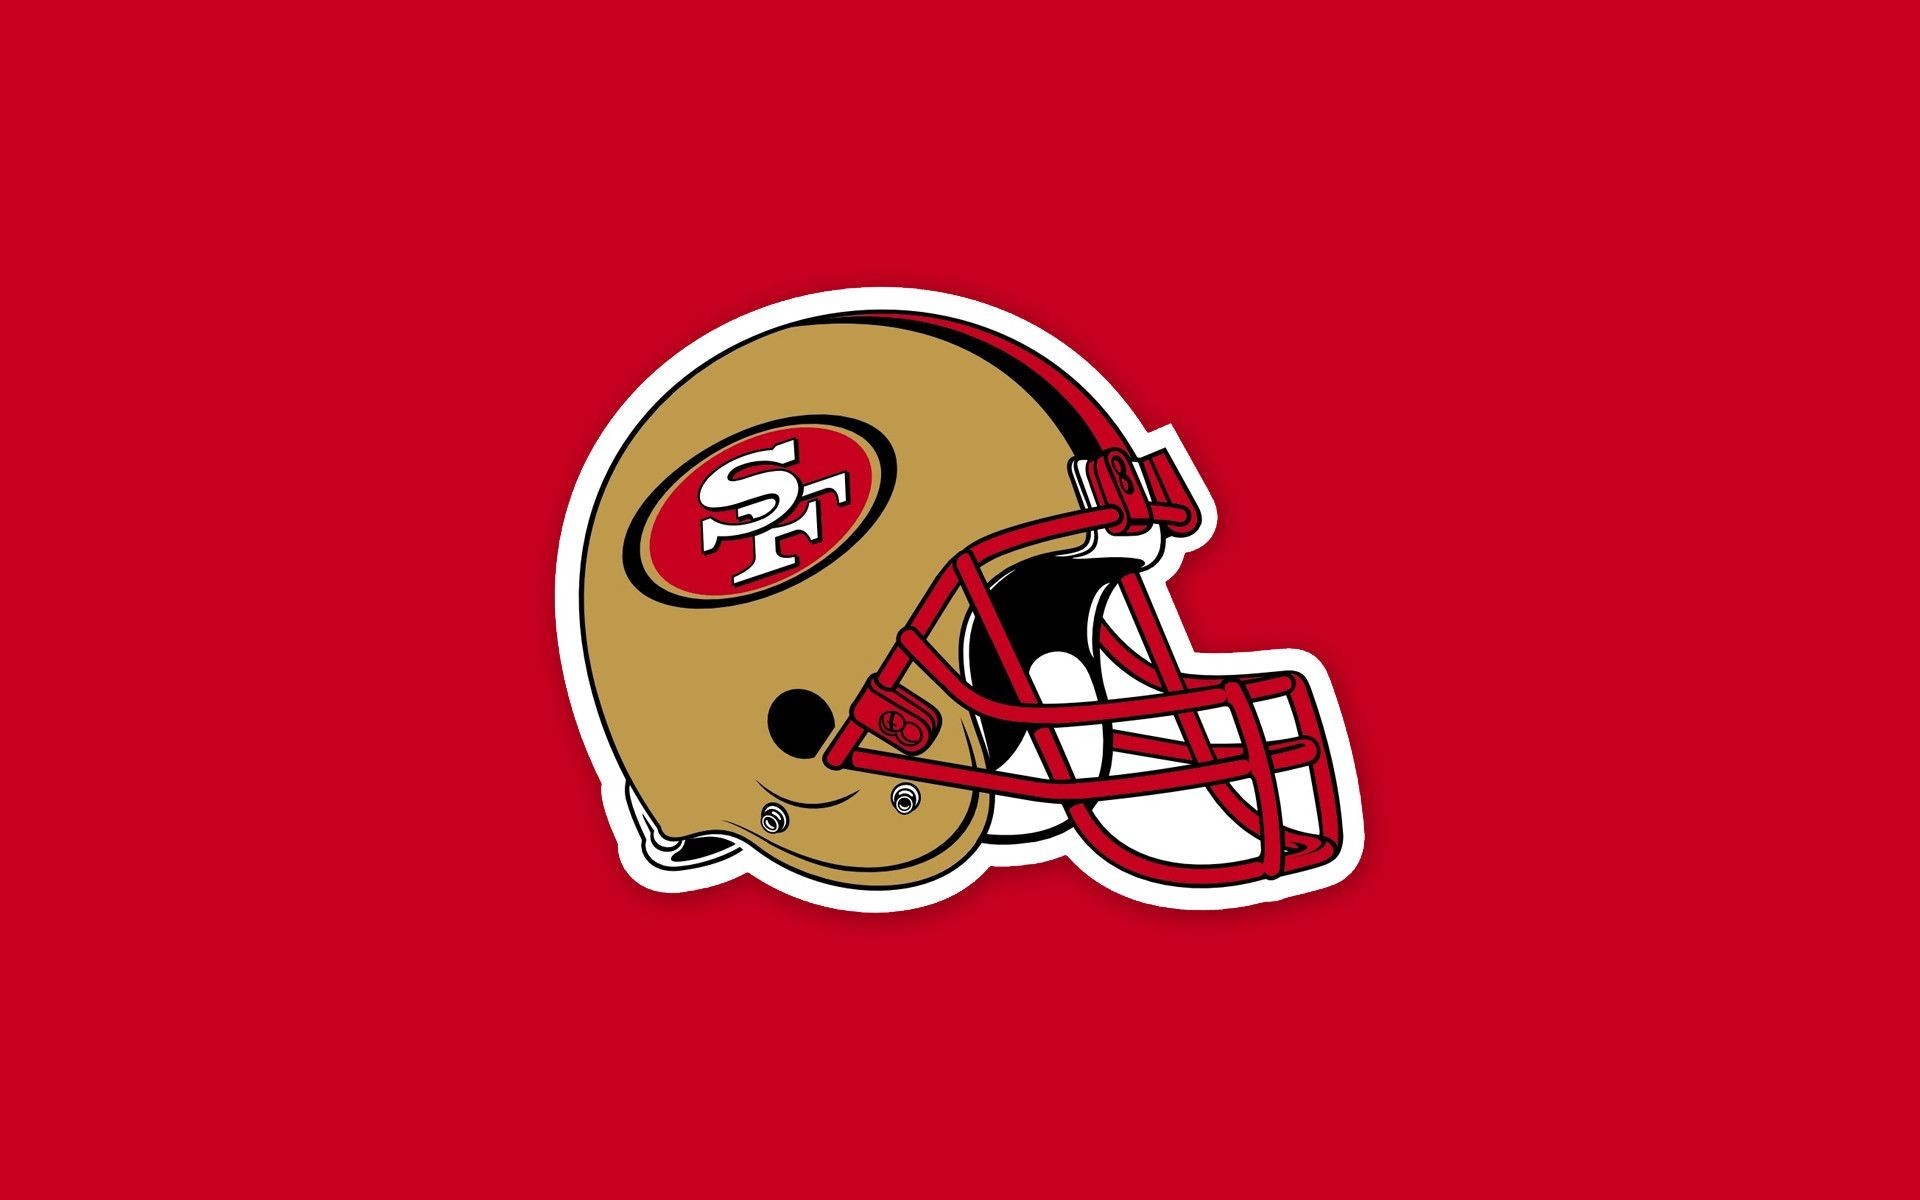 1920x1200  Most Downloaded 49ers Wallpapers - Full HD wallpaper search